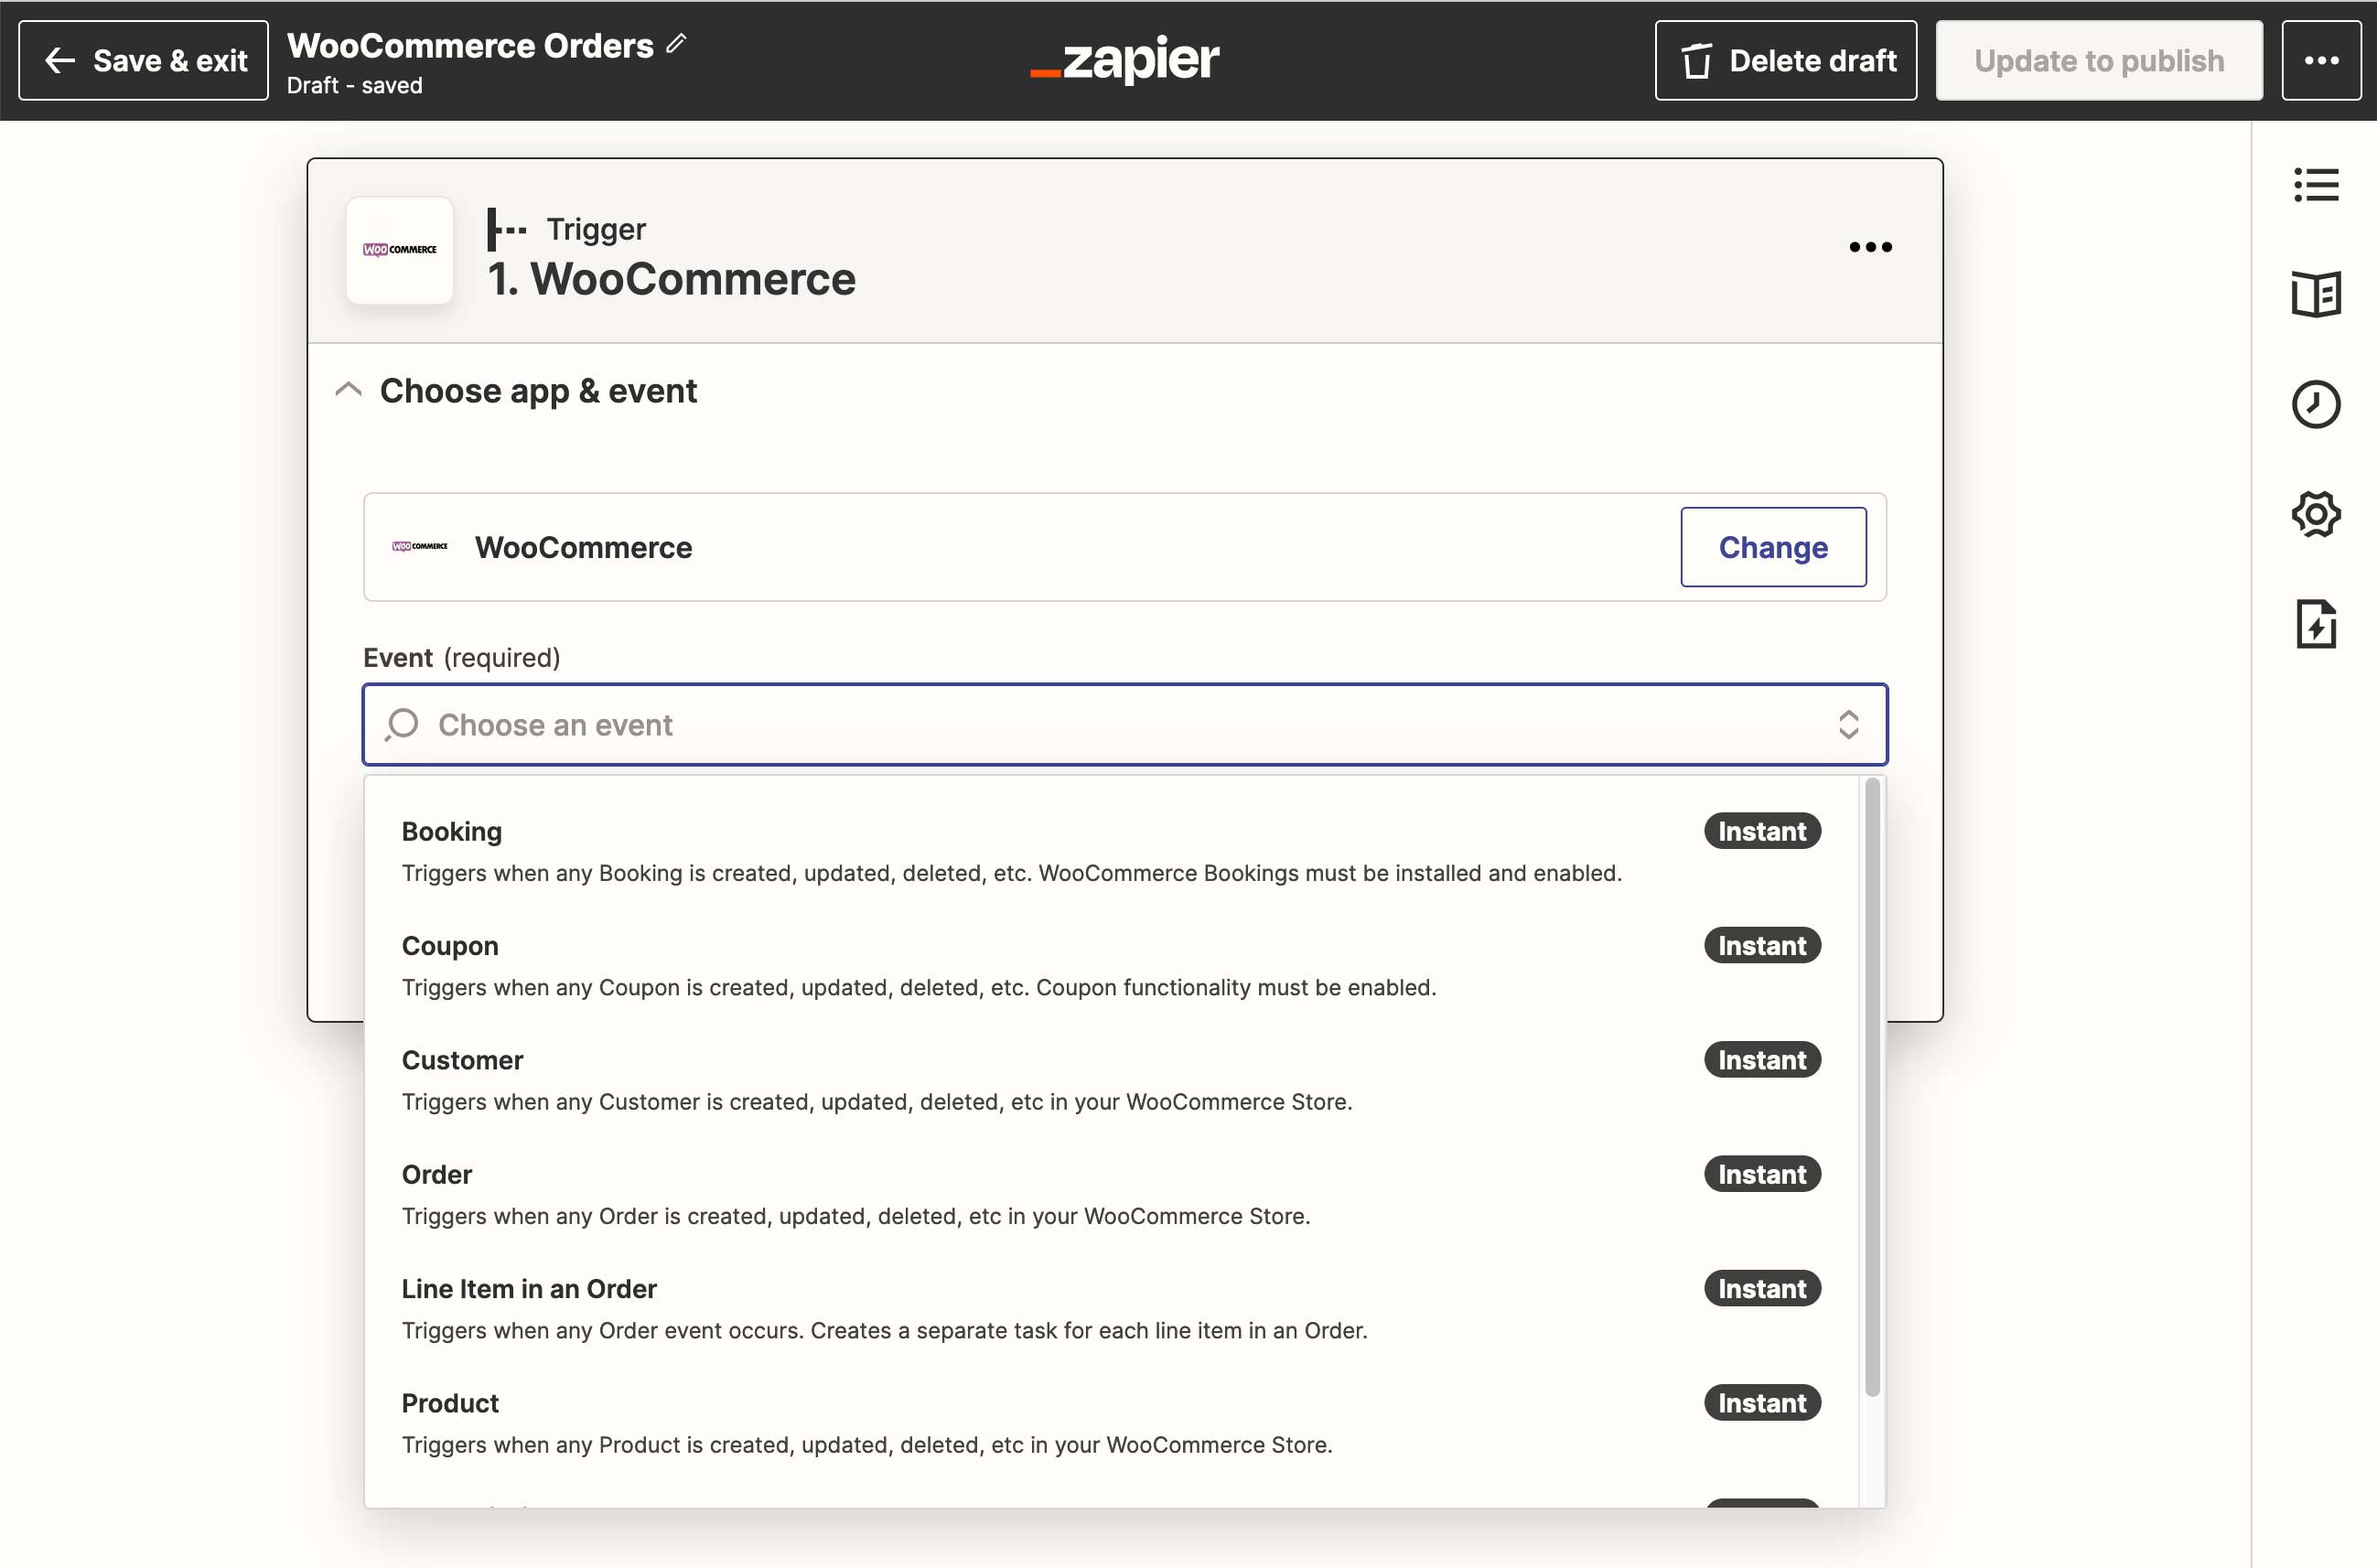 Available WooCommerce Triggers